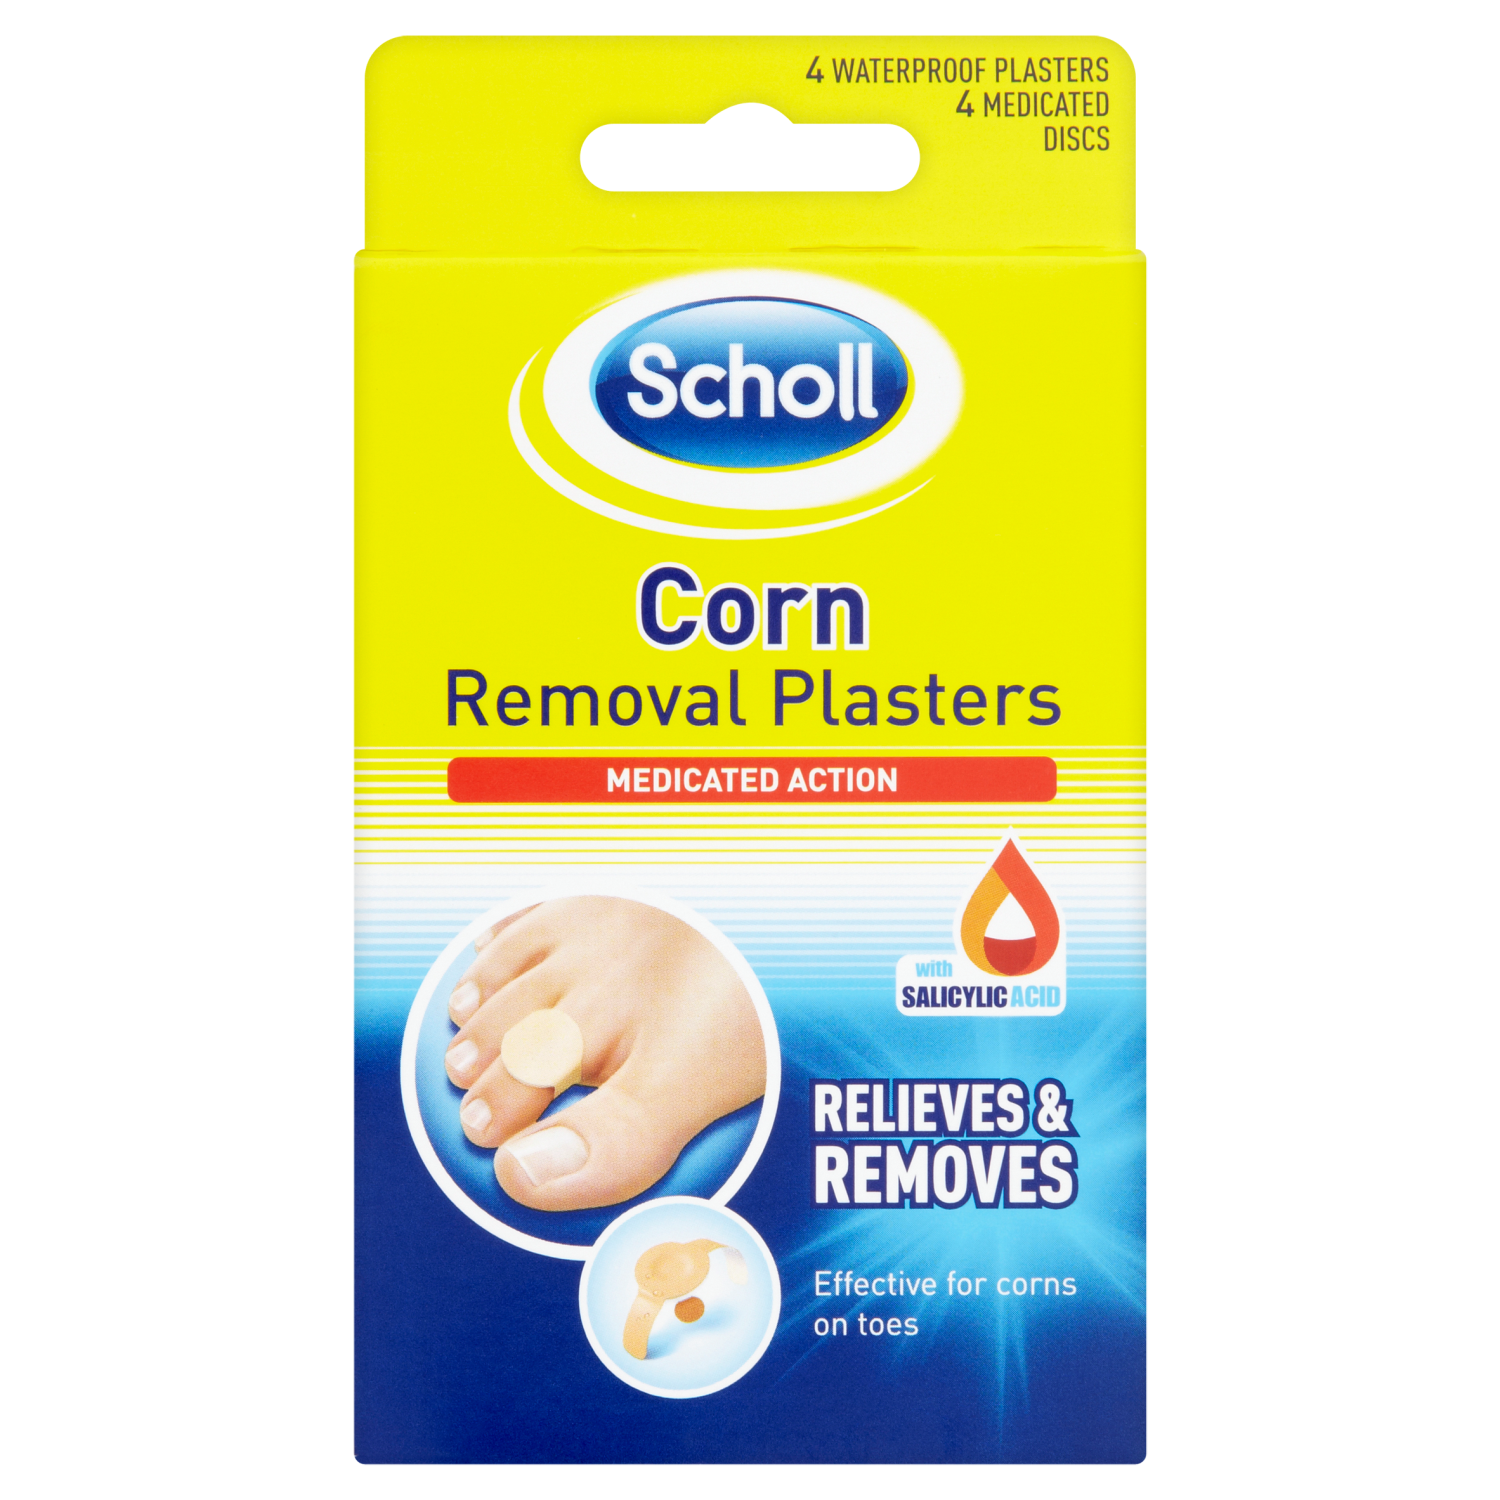 Removal Plasters